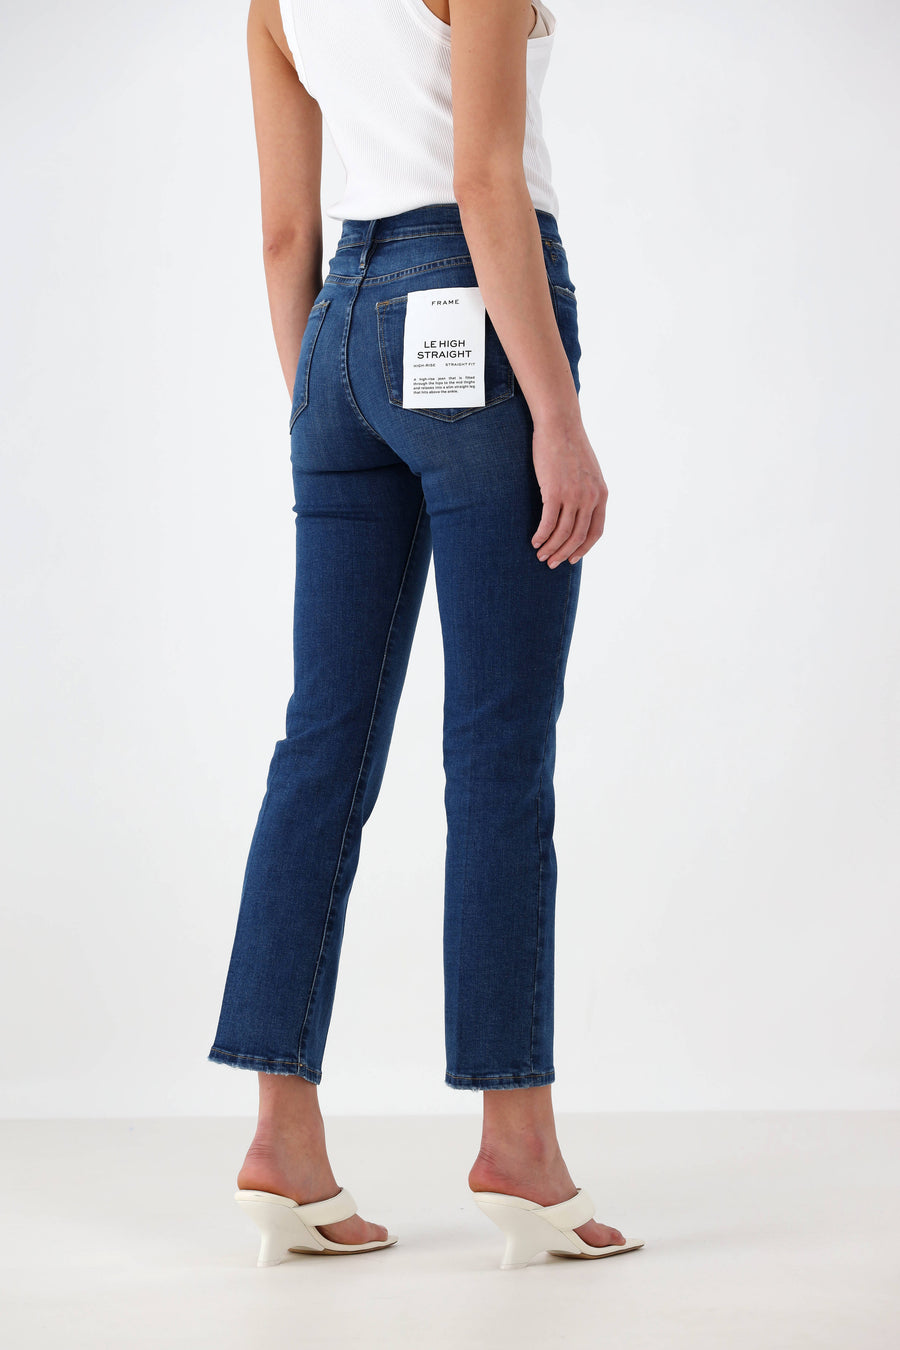 Jeans Le High Straight in EarthboundFrame - Anita Hass